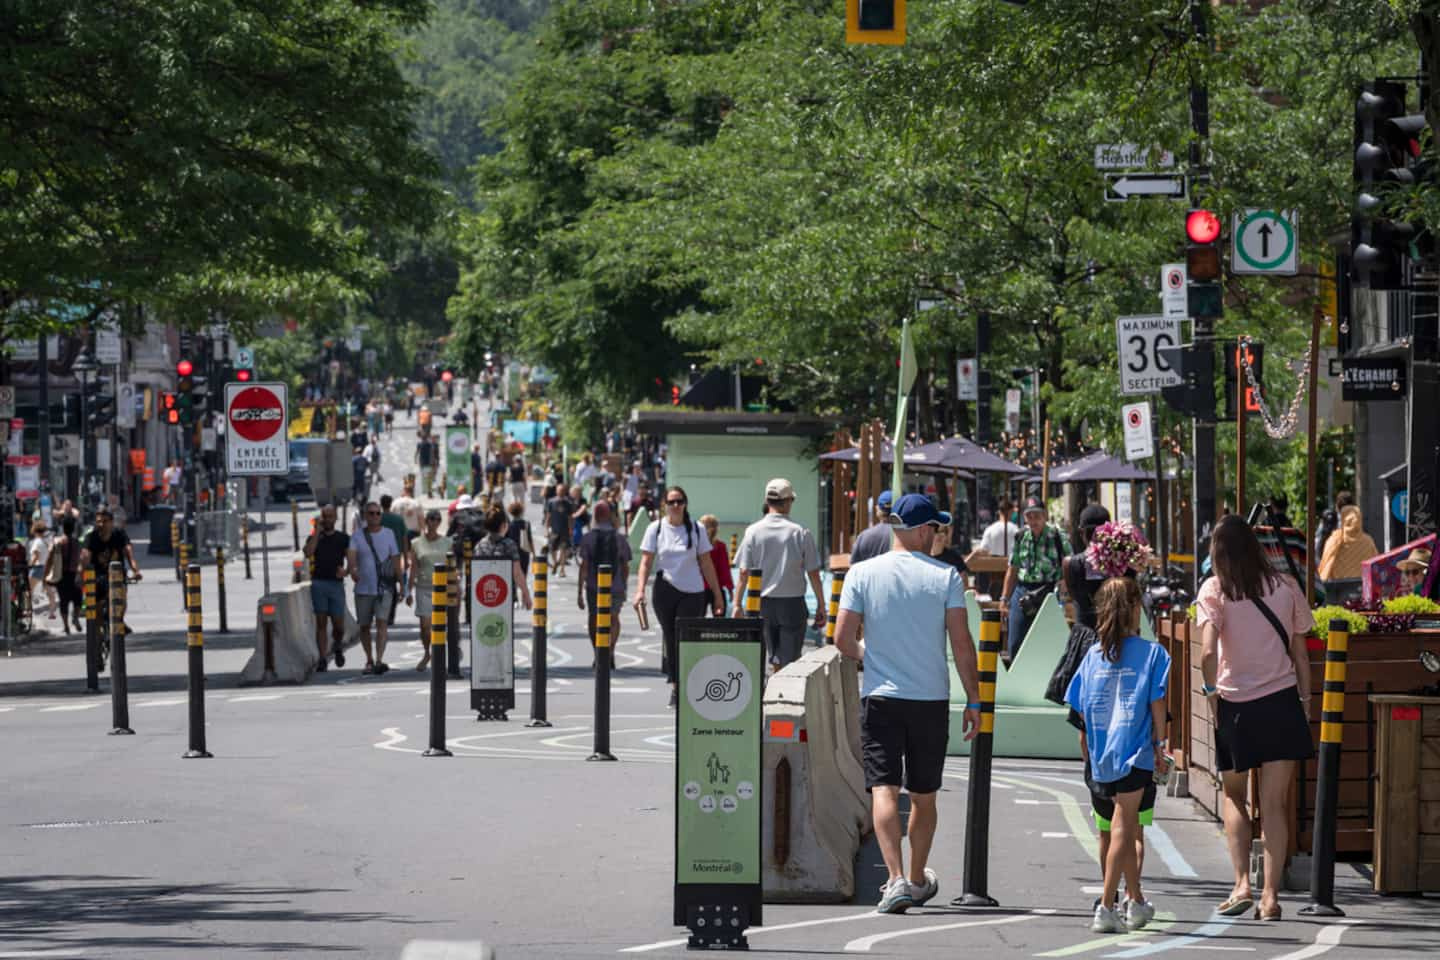 Heat and humidity overhang Quebec this weekend